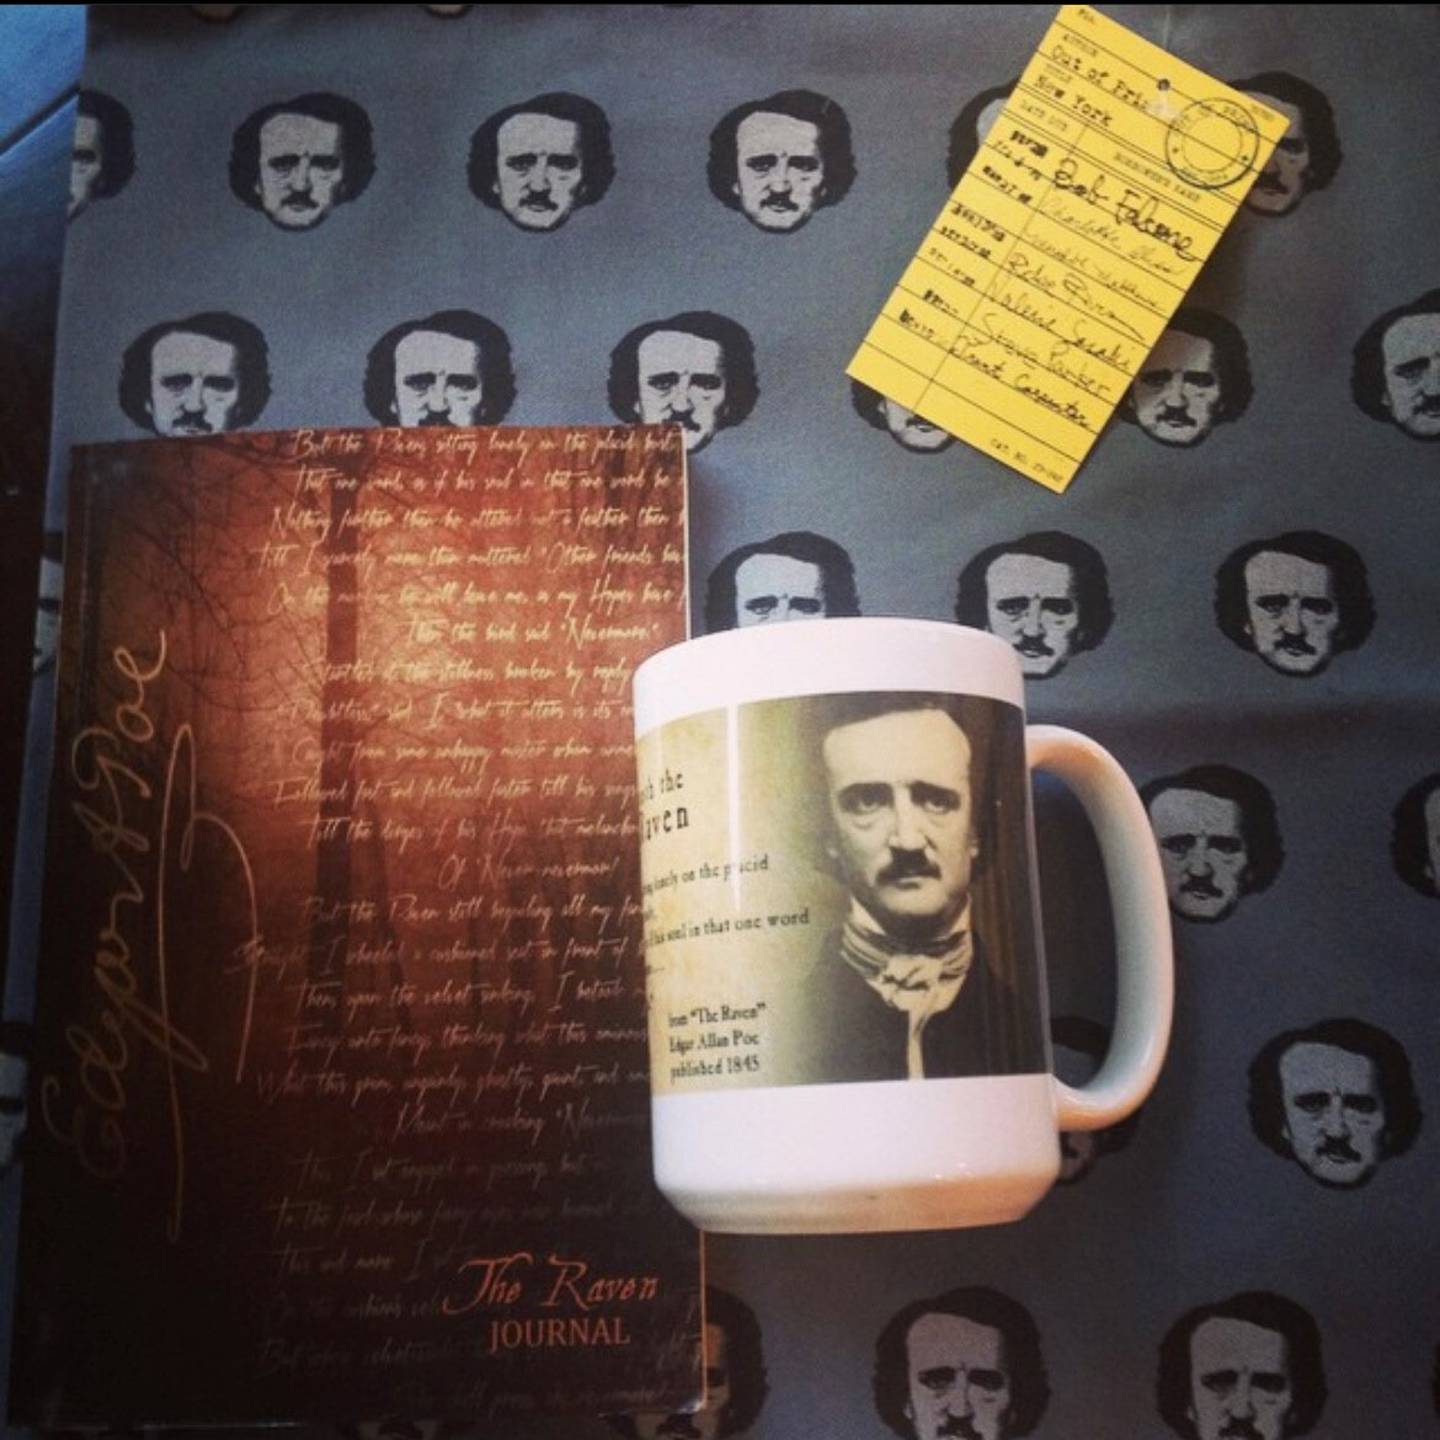 “The Raven” is one of Edgar Allan Poe’s iconic pieces of work and it’s not uncommon to see portions of it depicted on memorabilia, like this coffee mug.